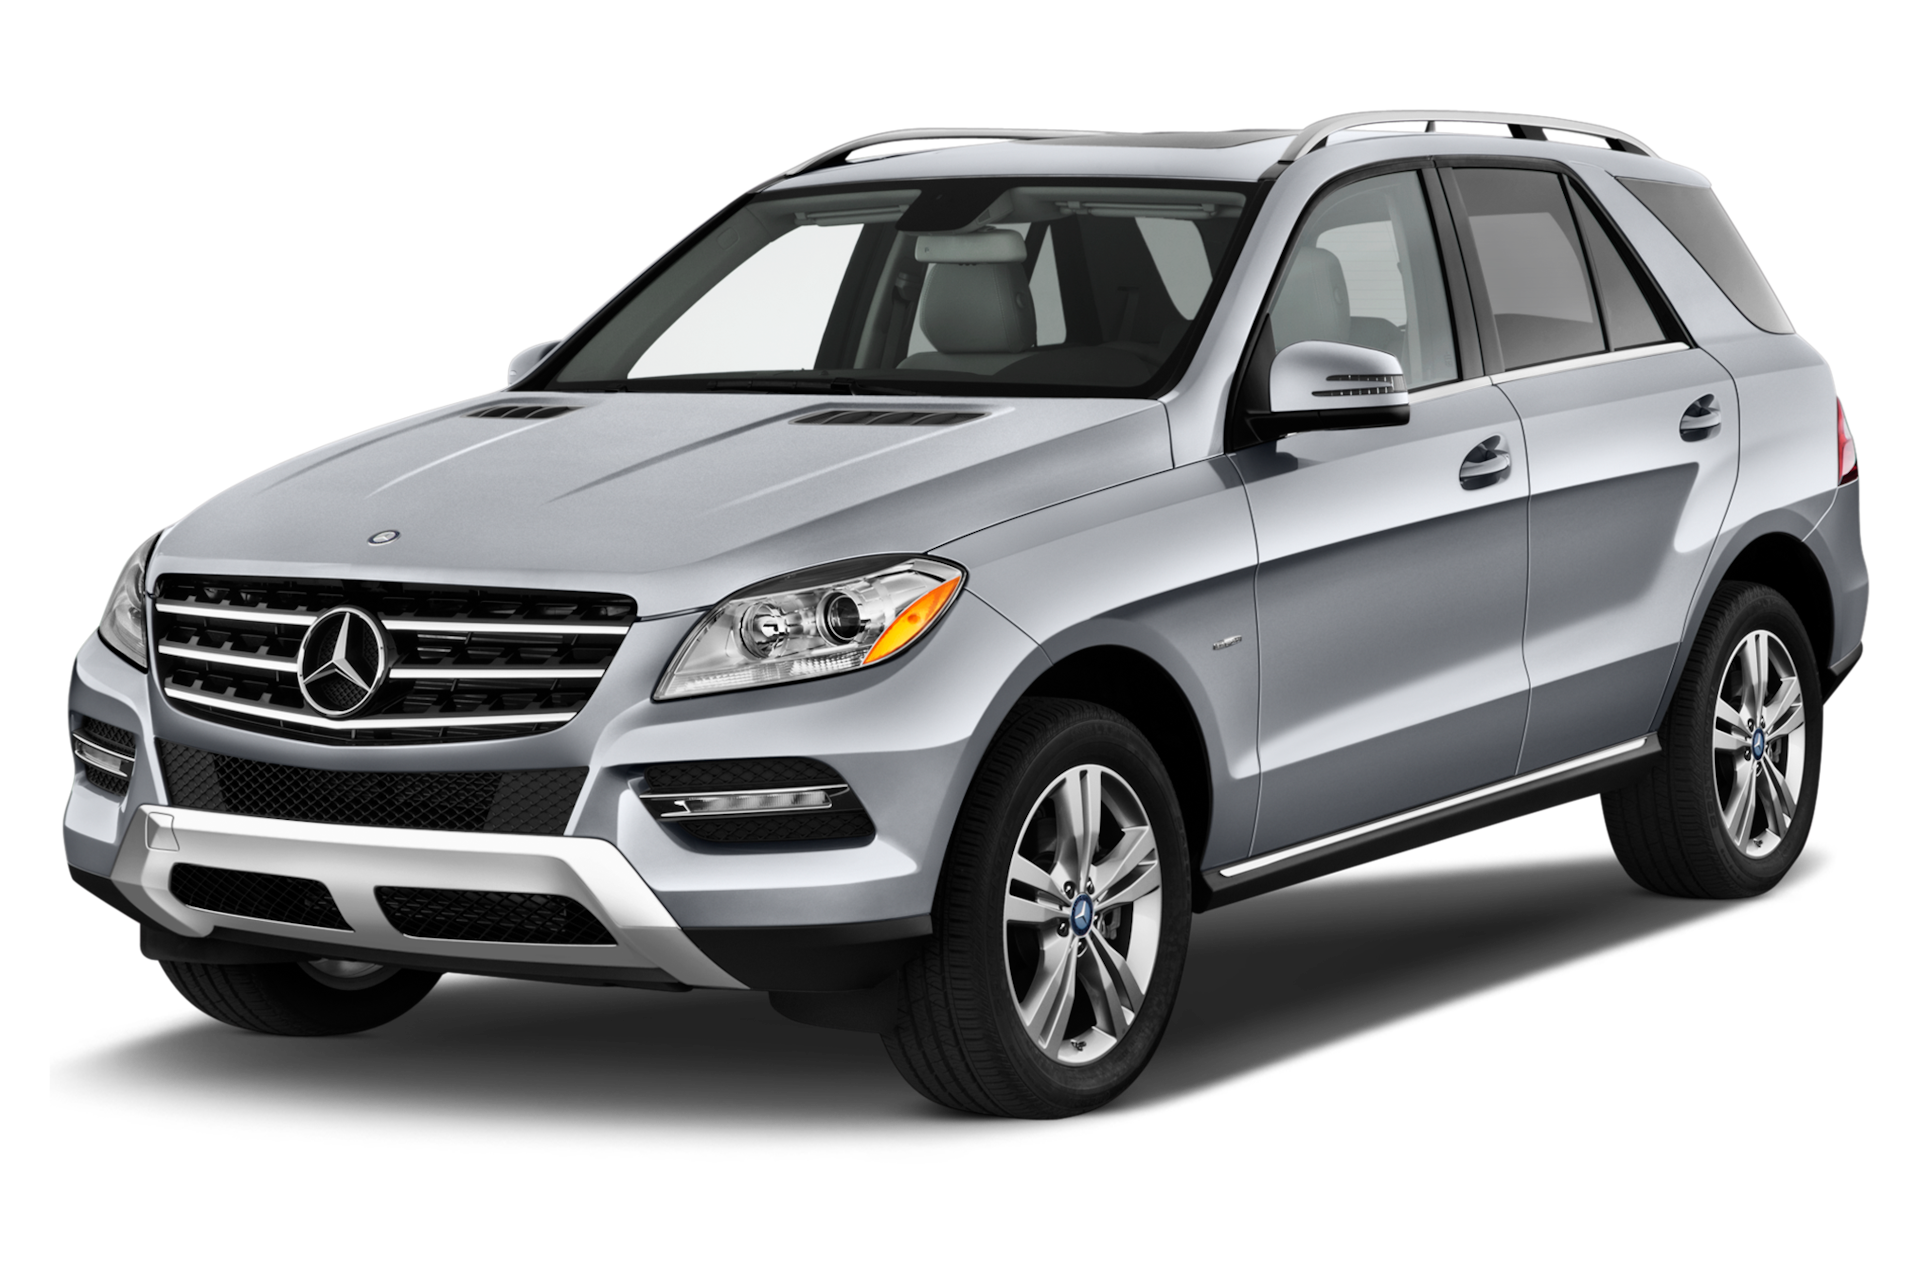 2015 Mercedes-Benz M-Class Prices, Reviews, and Photos - MotorTrend